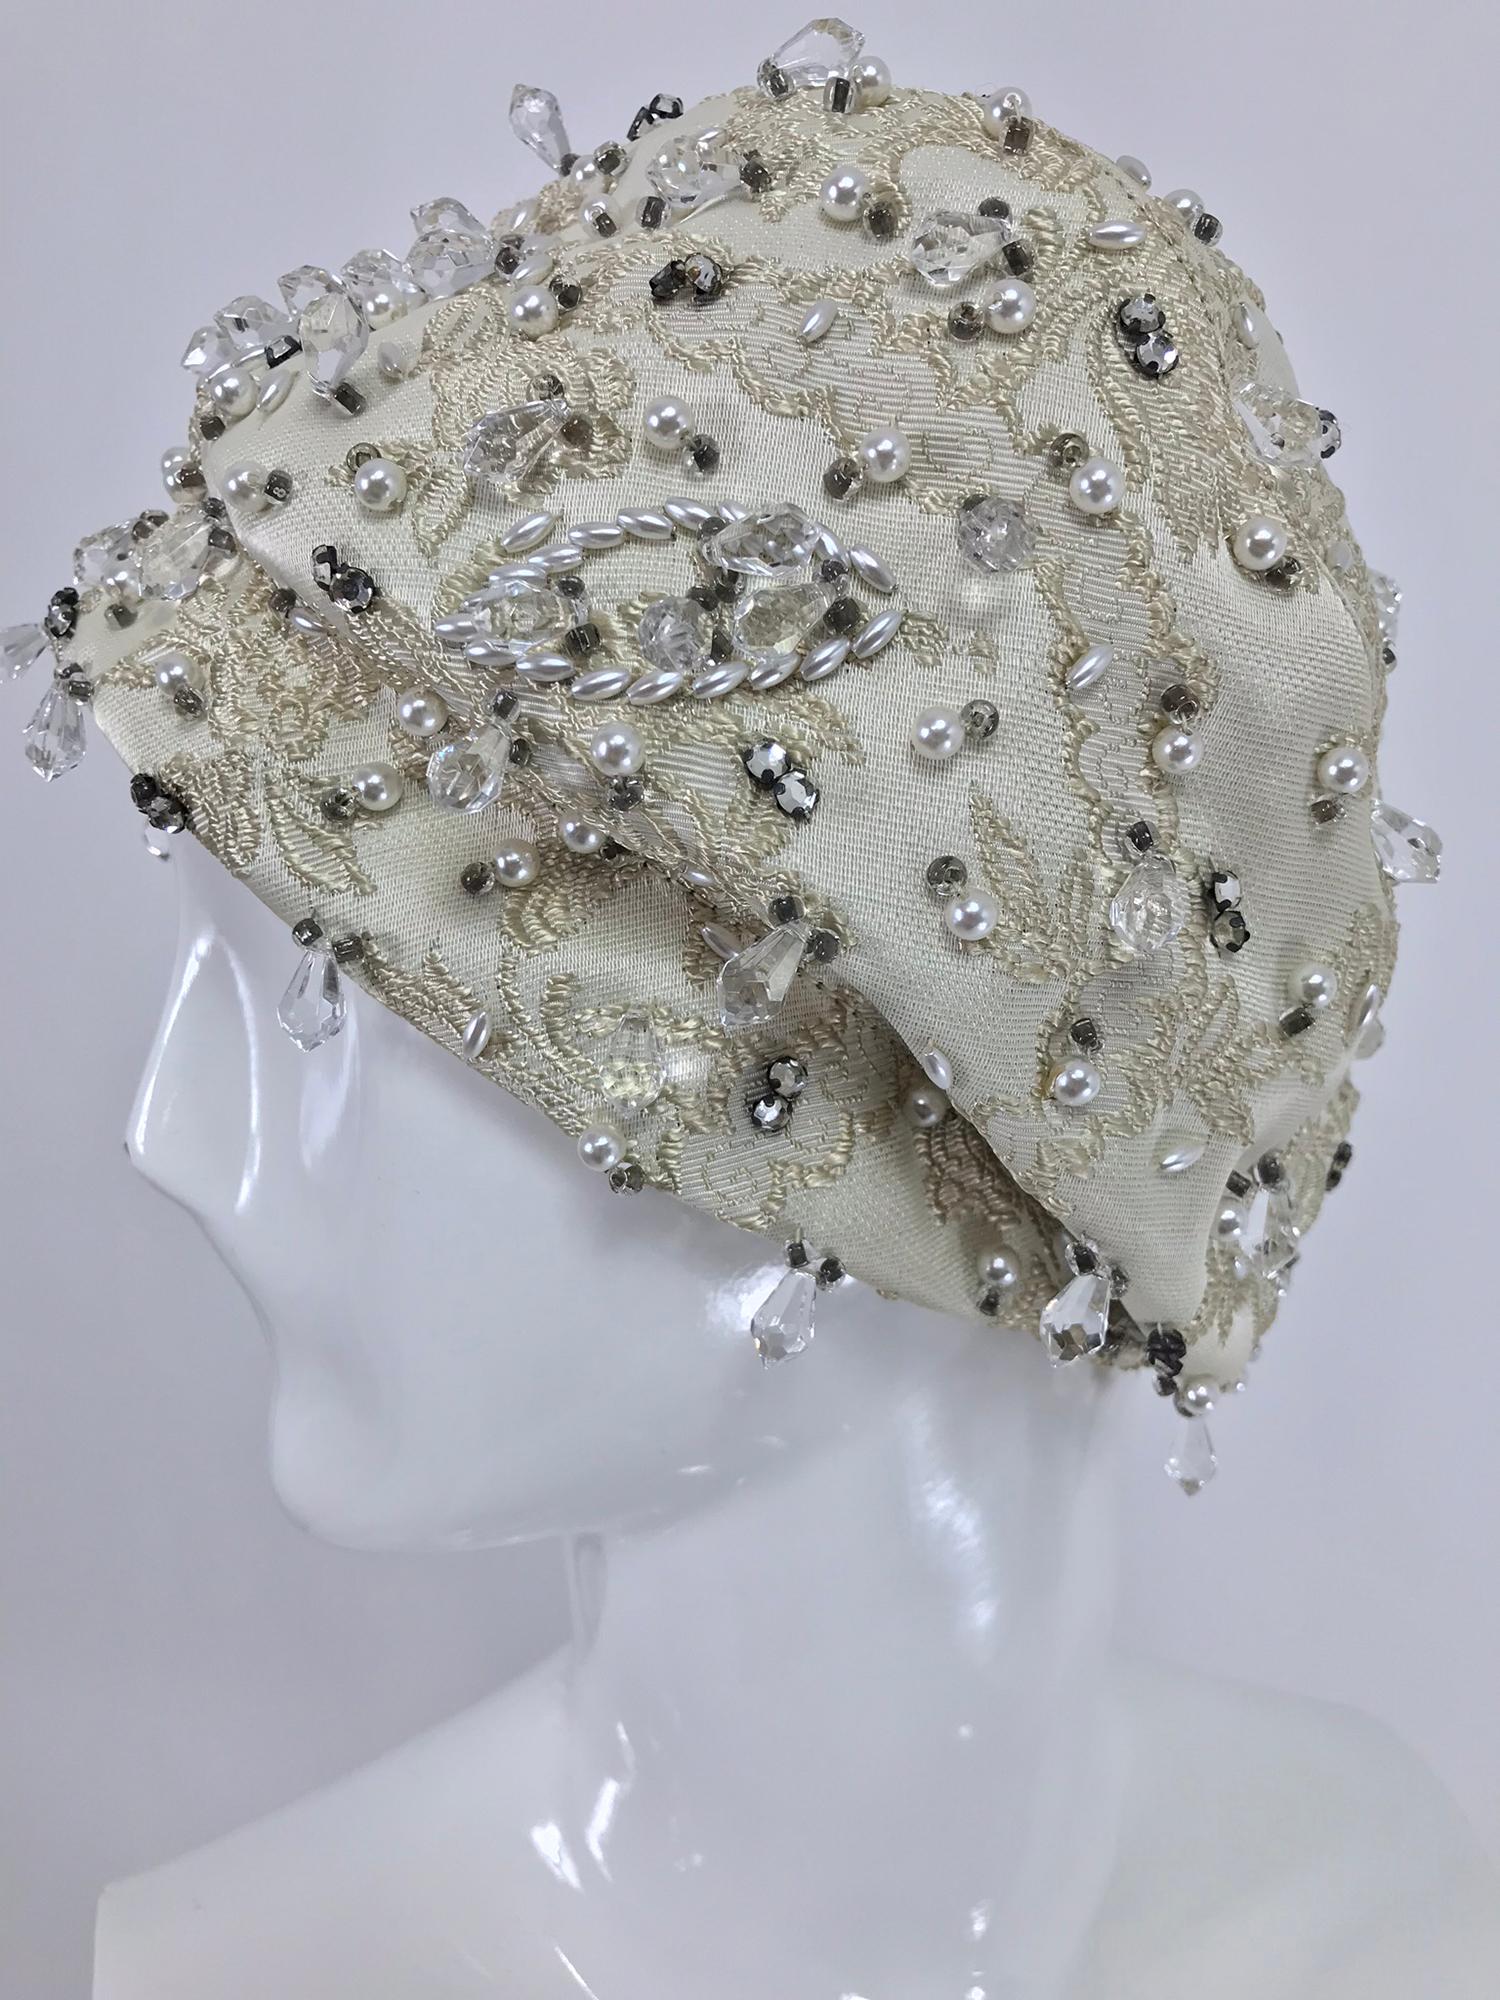 Vintage Christian Dior cream brocade beaded turban hat from the 1960s. Marked size 22.

Measurements are in inches:

21 1/2 inside at band

5 1/2 high